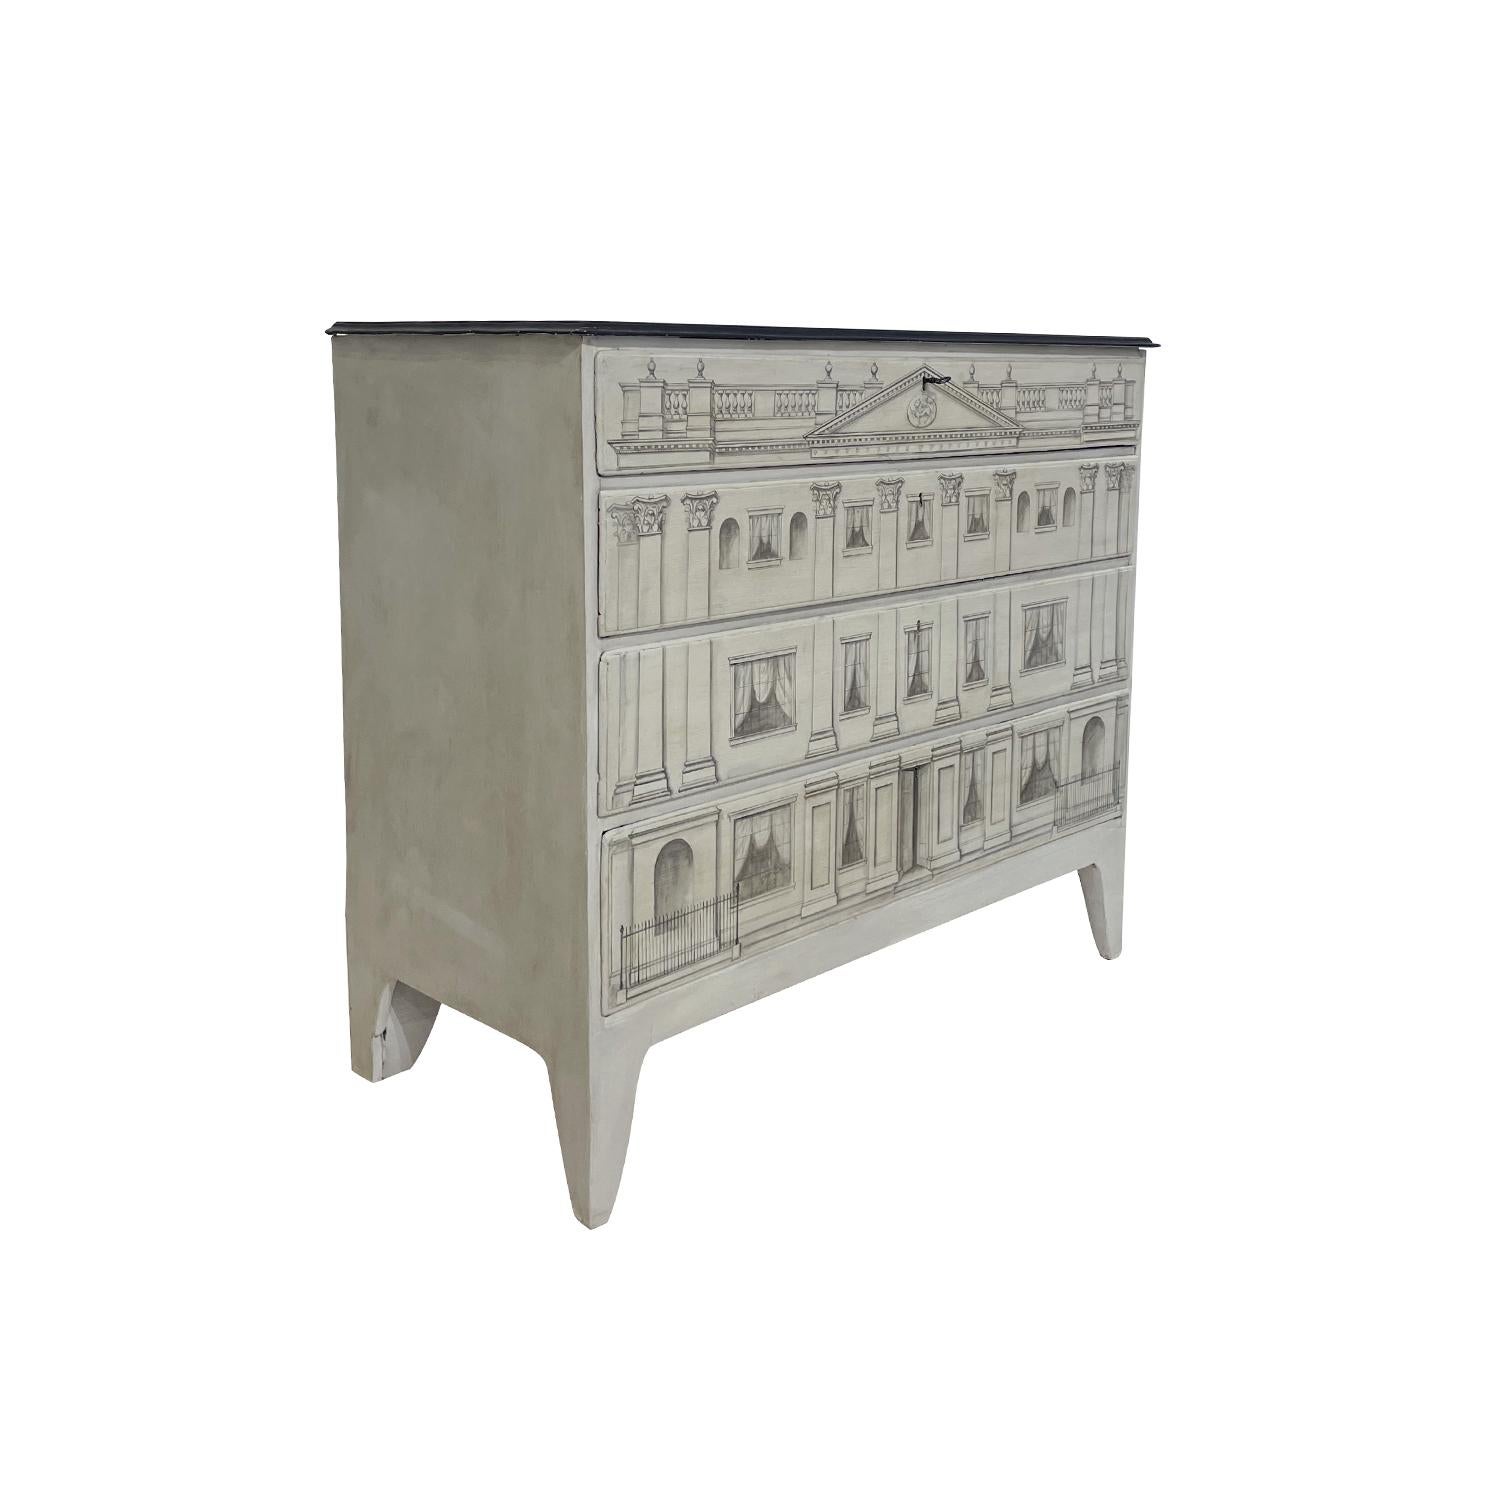 A light-grey, antique Swedish Gustavian single chest, cupboard made of hand crafted painted Pinewood, in good condition. The detailed Scandinavian cupboard has a black painted top, composed with three large drawers on smaller one, standing on four